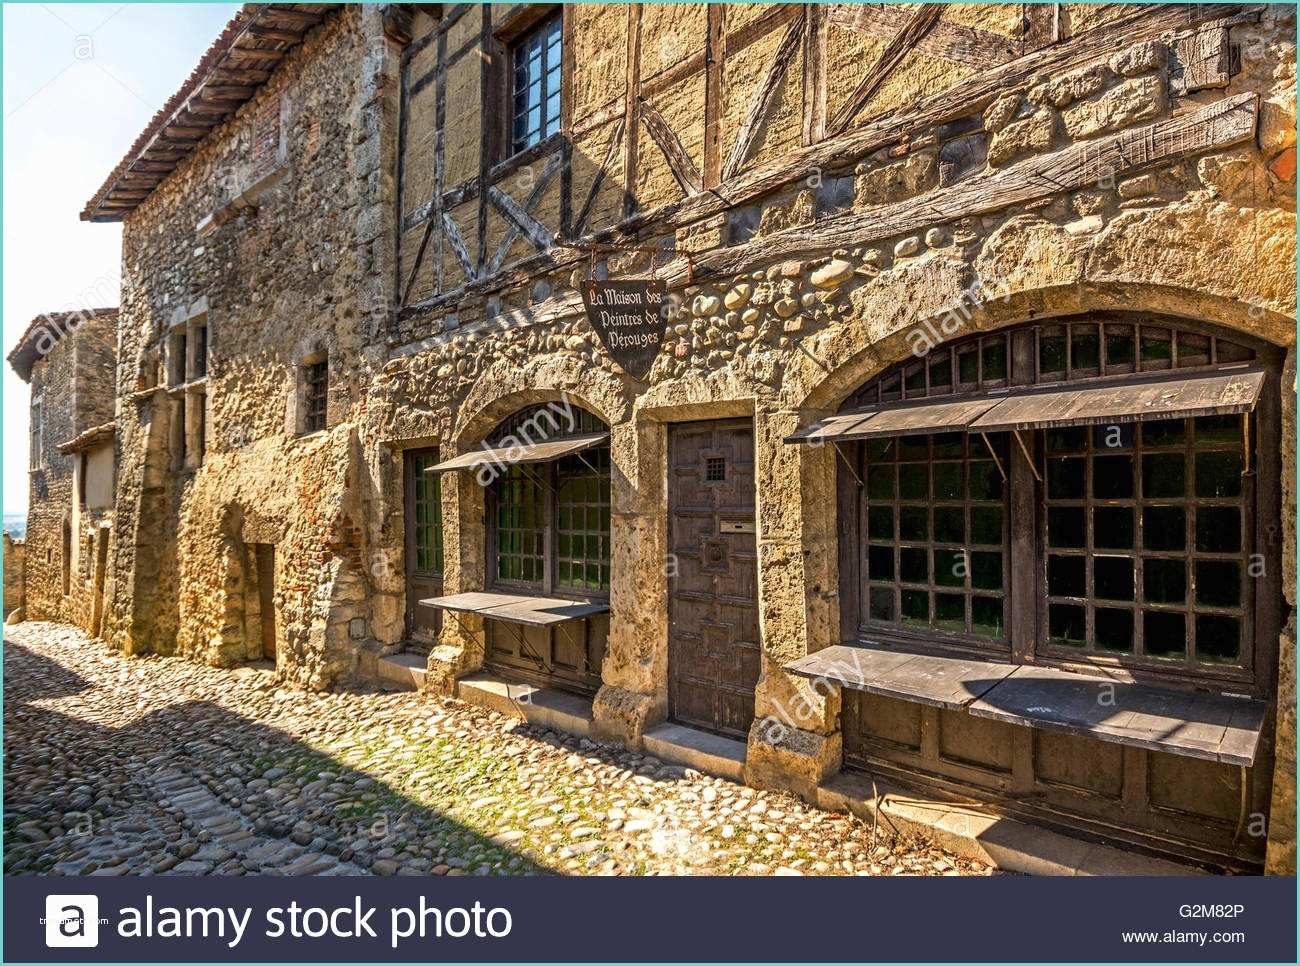 Maison Stock Images La Maison Des Peintres Half Timbered In Old City Of